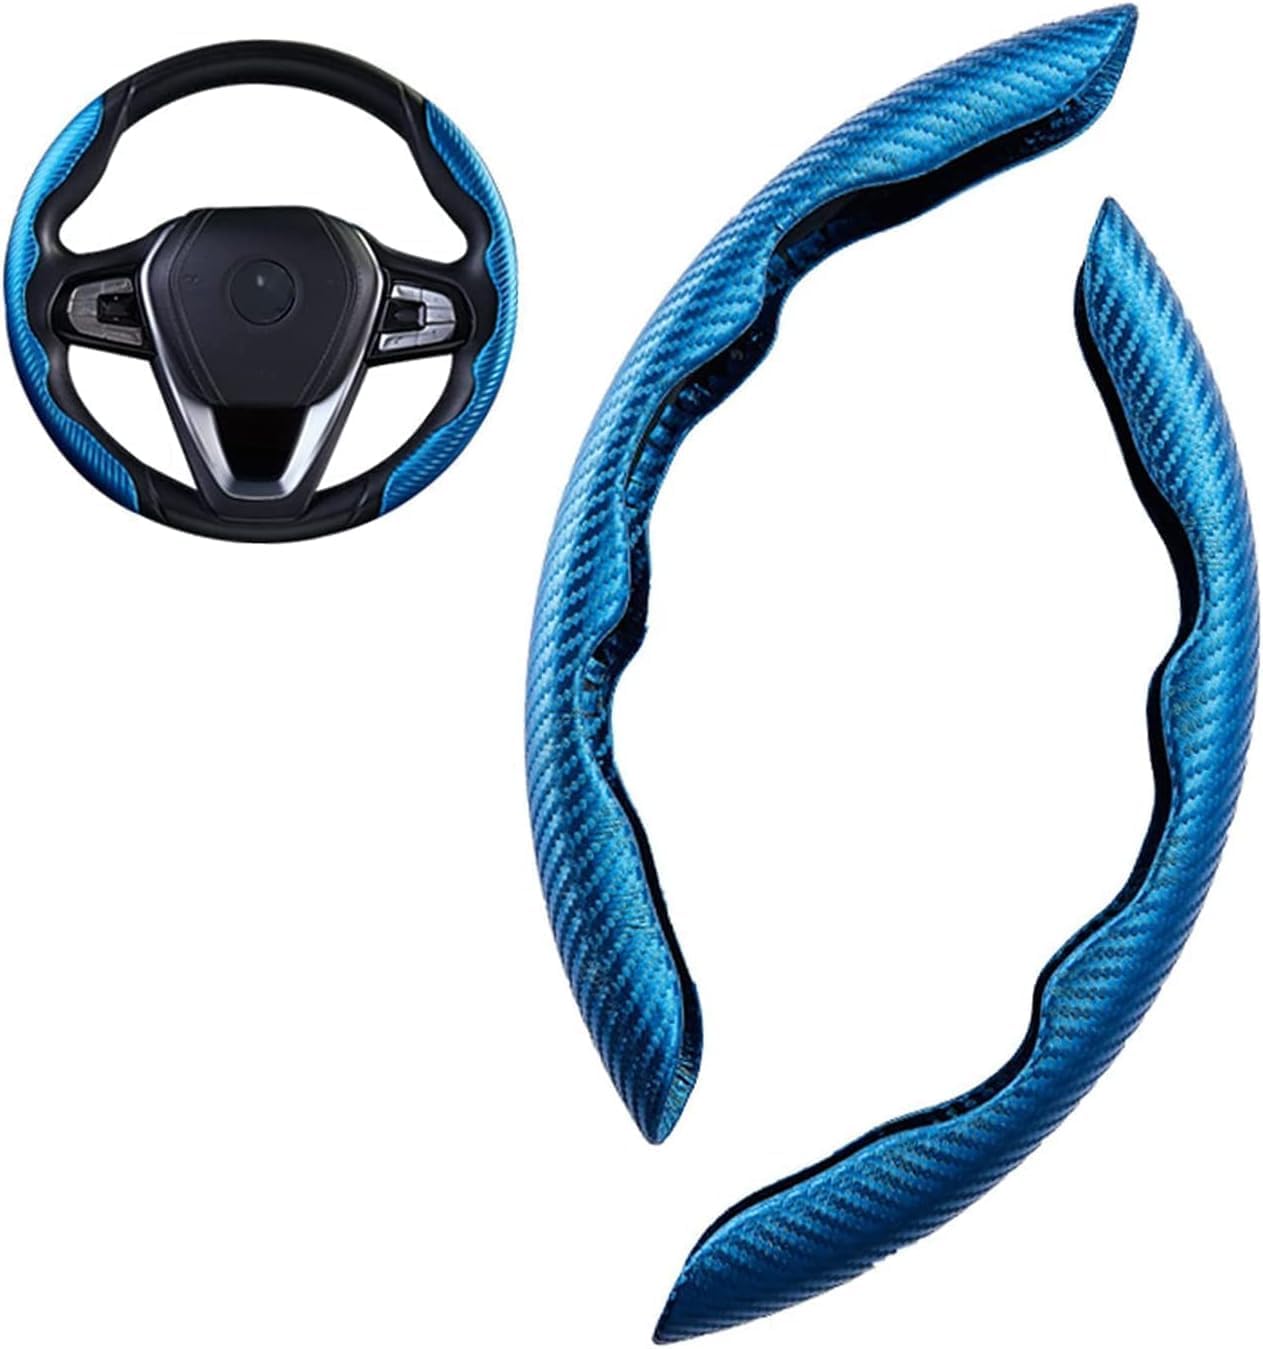 Pack of 2 Car Steering Wheel Cover for Audi A1 A3 A4 A5 A6 A7 A8 S3 S4 S5 S6 S7 S8 RS3 RS4 RS5 RS6 RS7,Non-Slip Wear-Resistant Carbon Fibre Steering Wheel Protector,C-Blue von INGKE